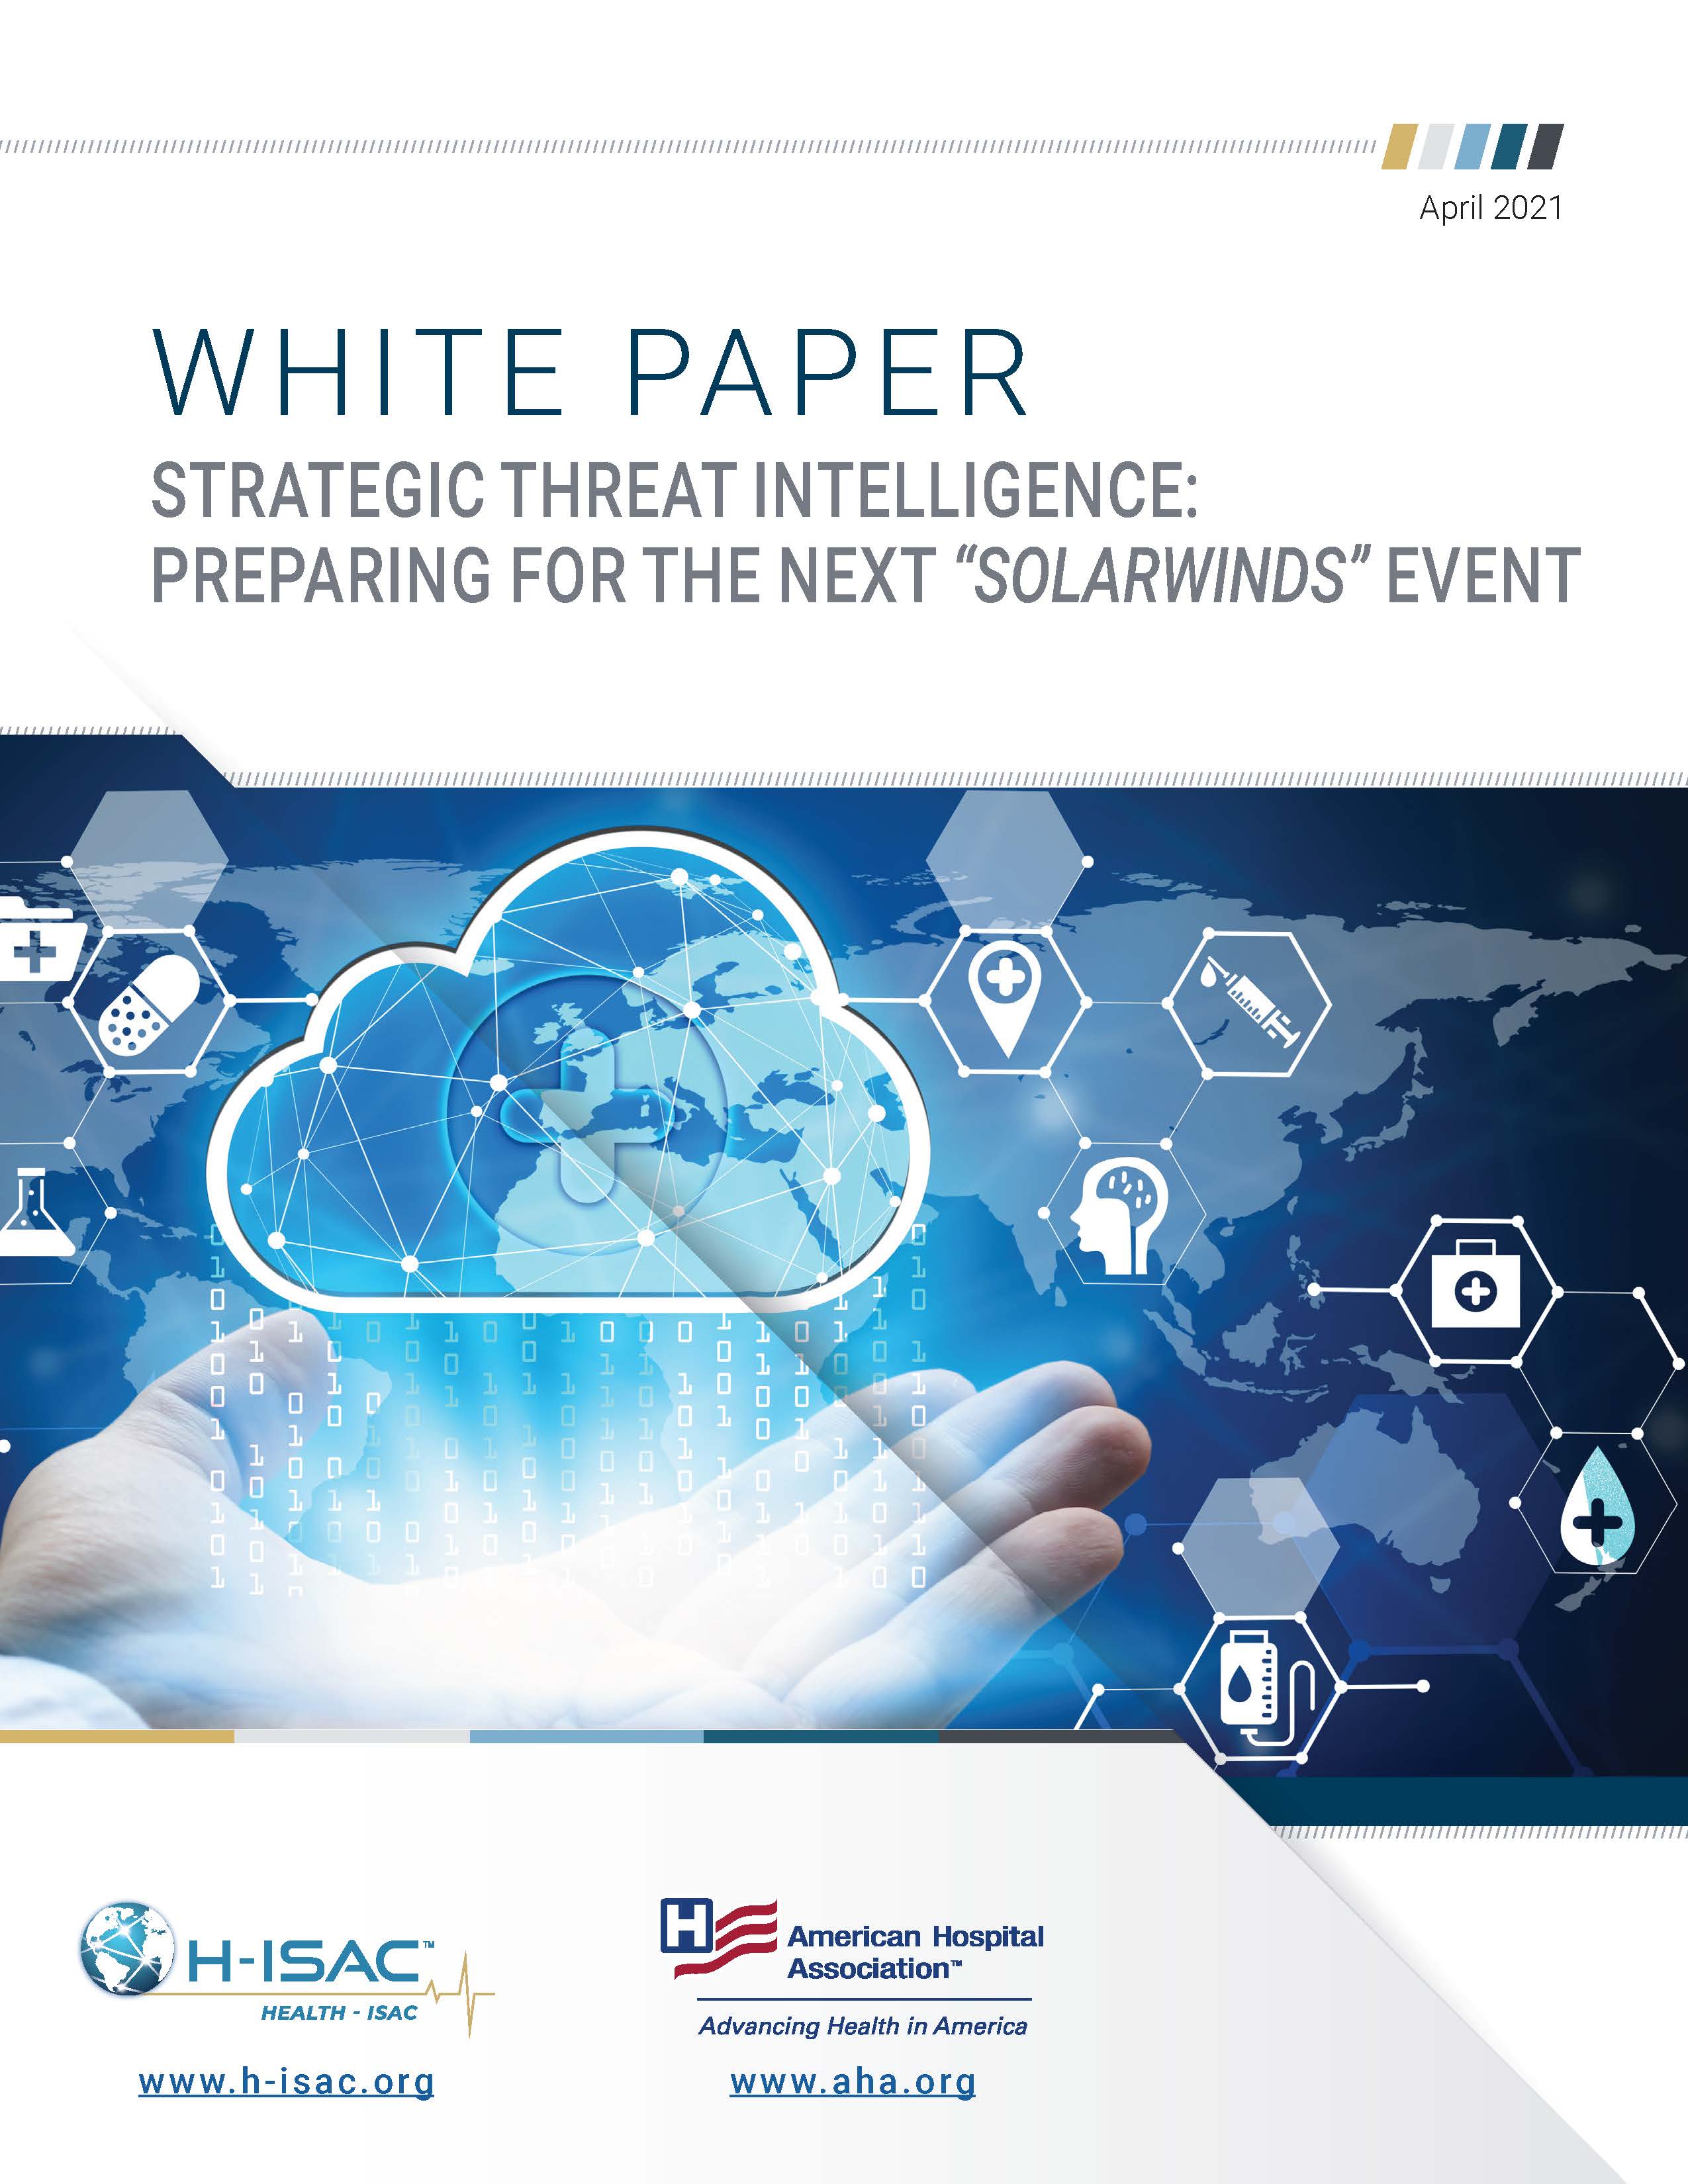 White Paper: Strategic Threat Intelligence: Preparing for the Next “Solarwinds” Event page 1